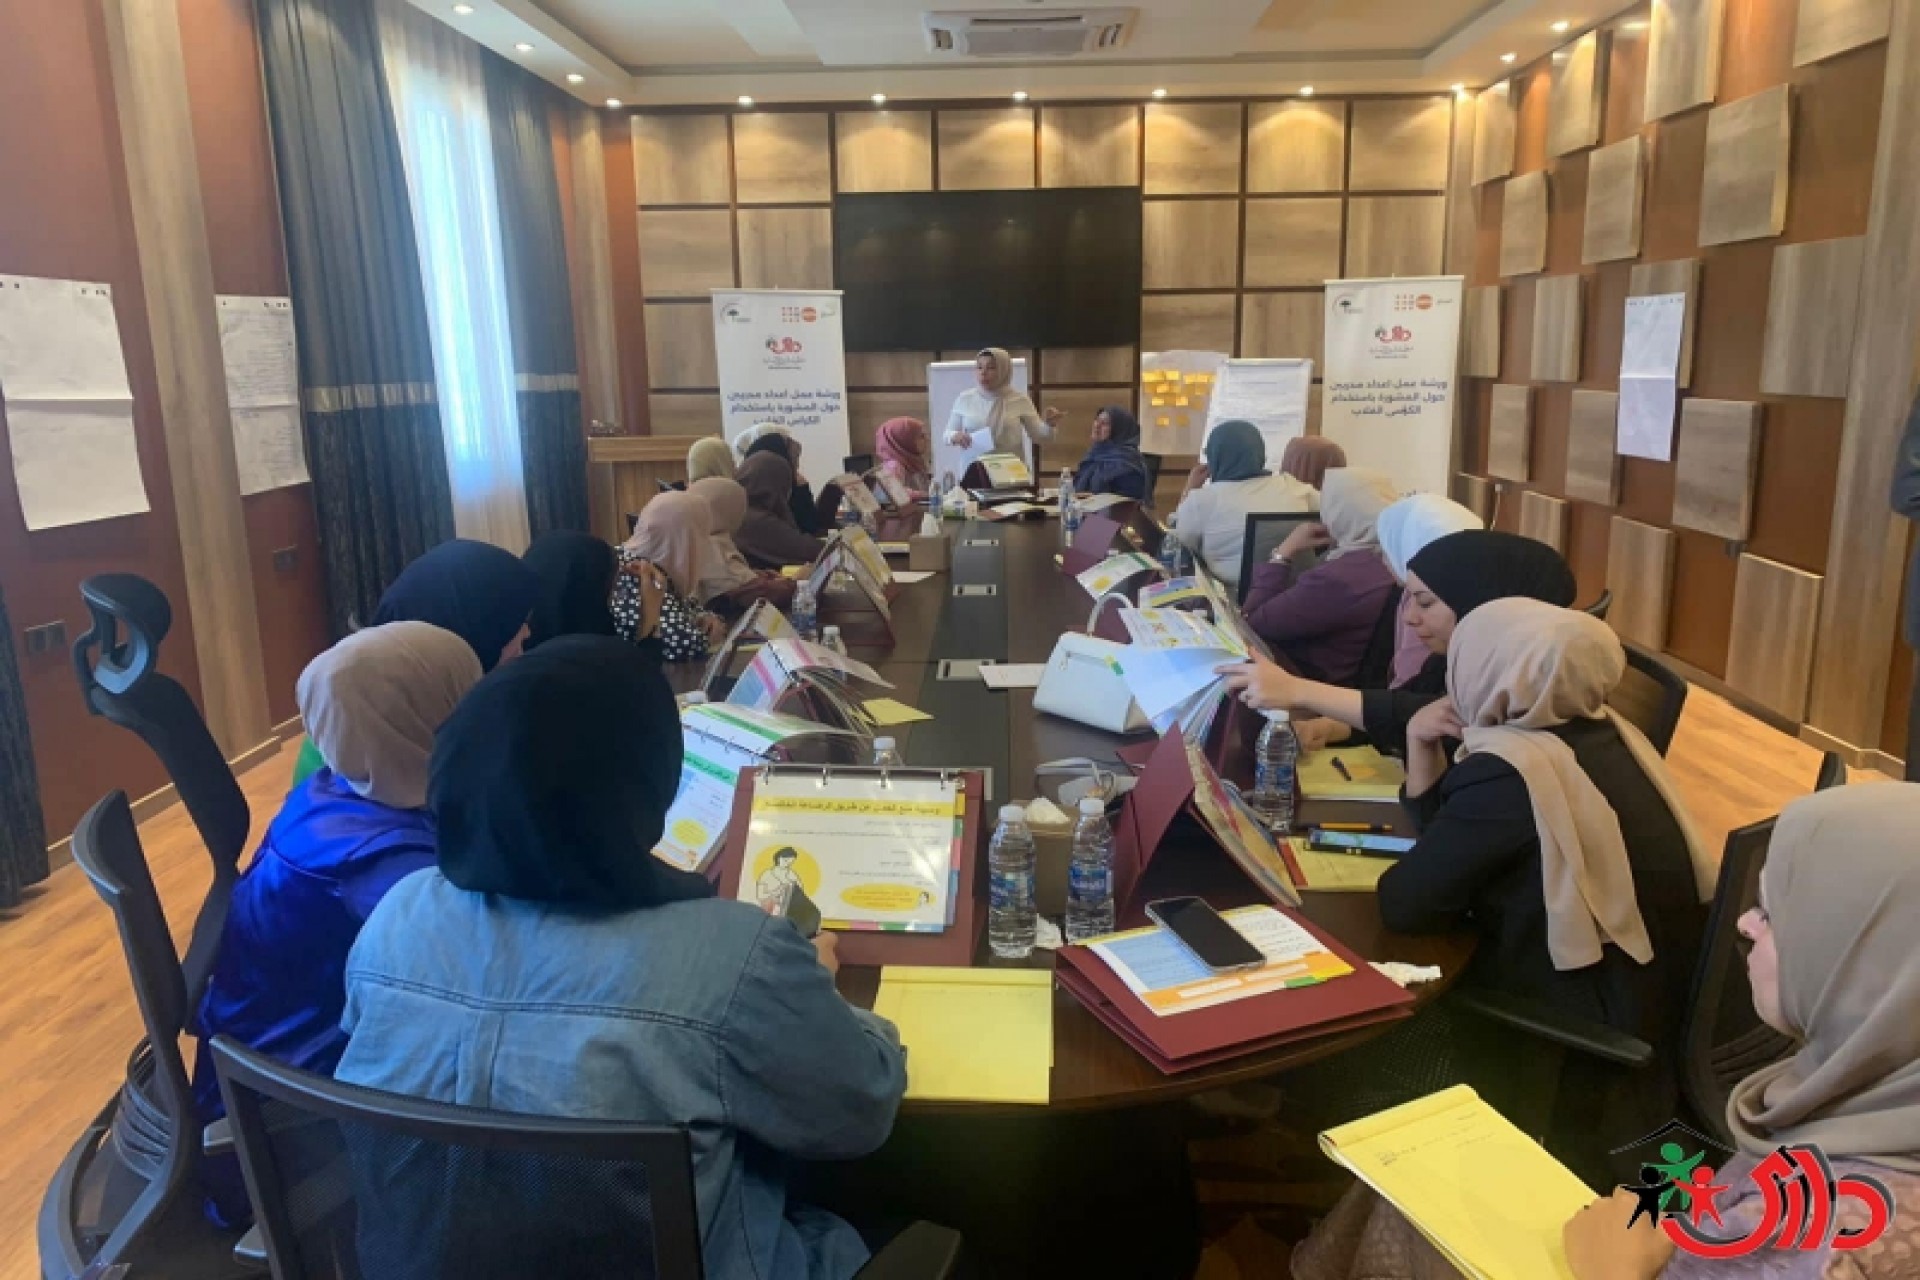 <span style='font-size:16px;'>DARY ORGANIZATION HOLDS WORKSHOPS TO DEVELOP 66 TRAINEES IN REPRODUCTIVE AND WOMEN’S HEALTH, FUNDED BY (UNFPA)</span>